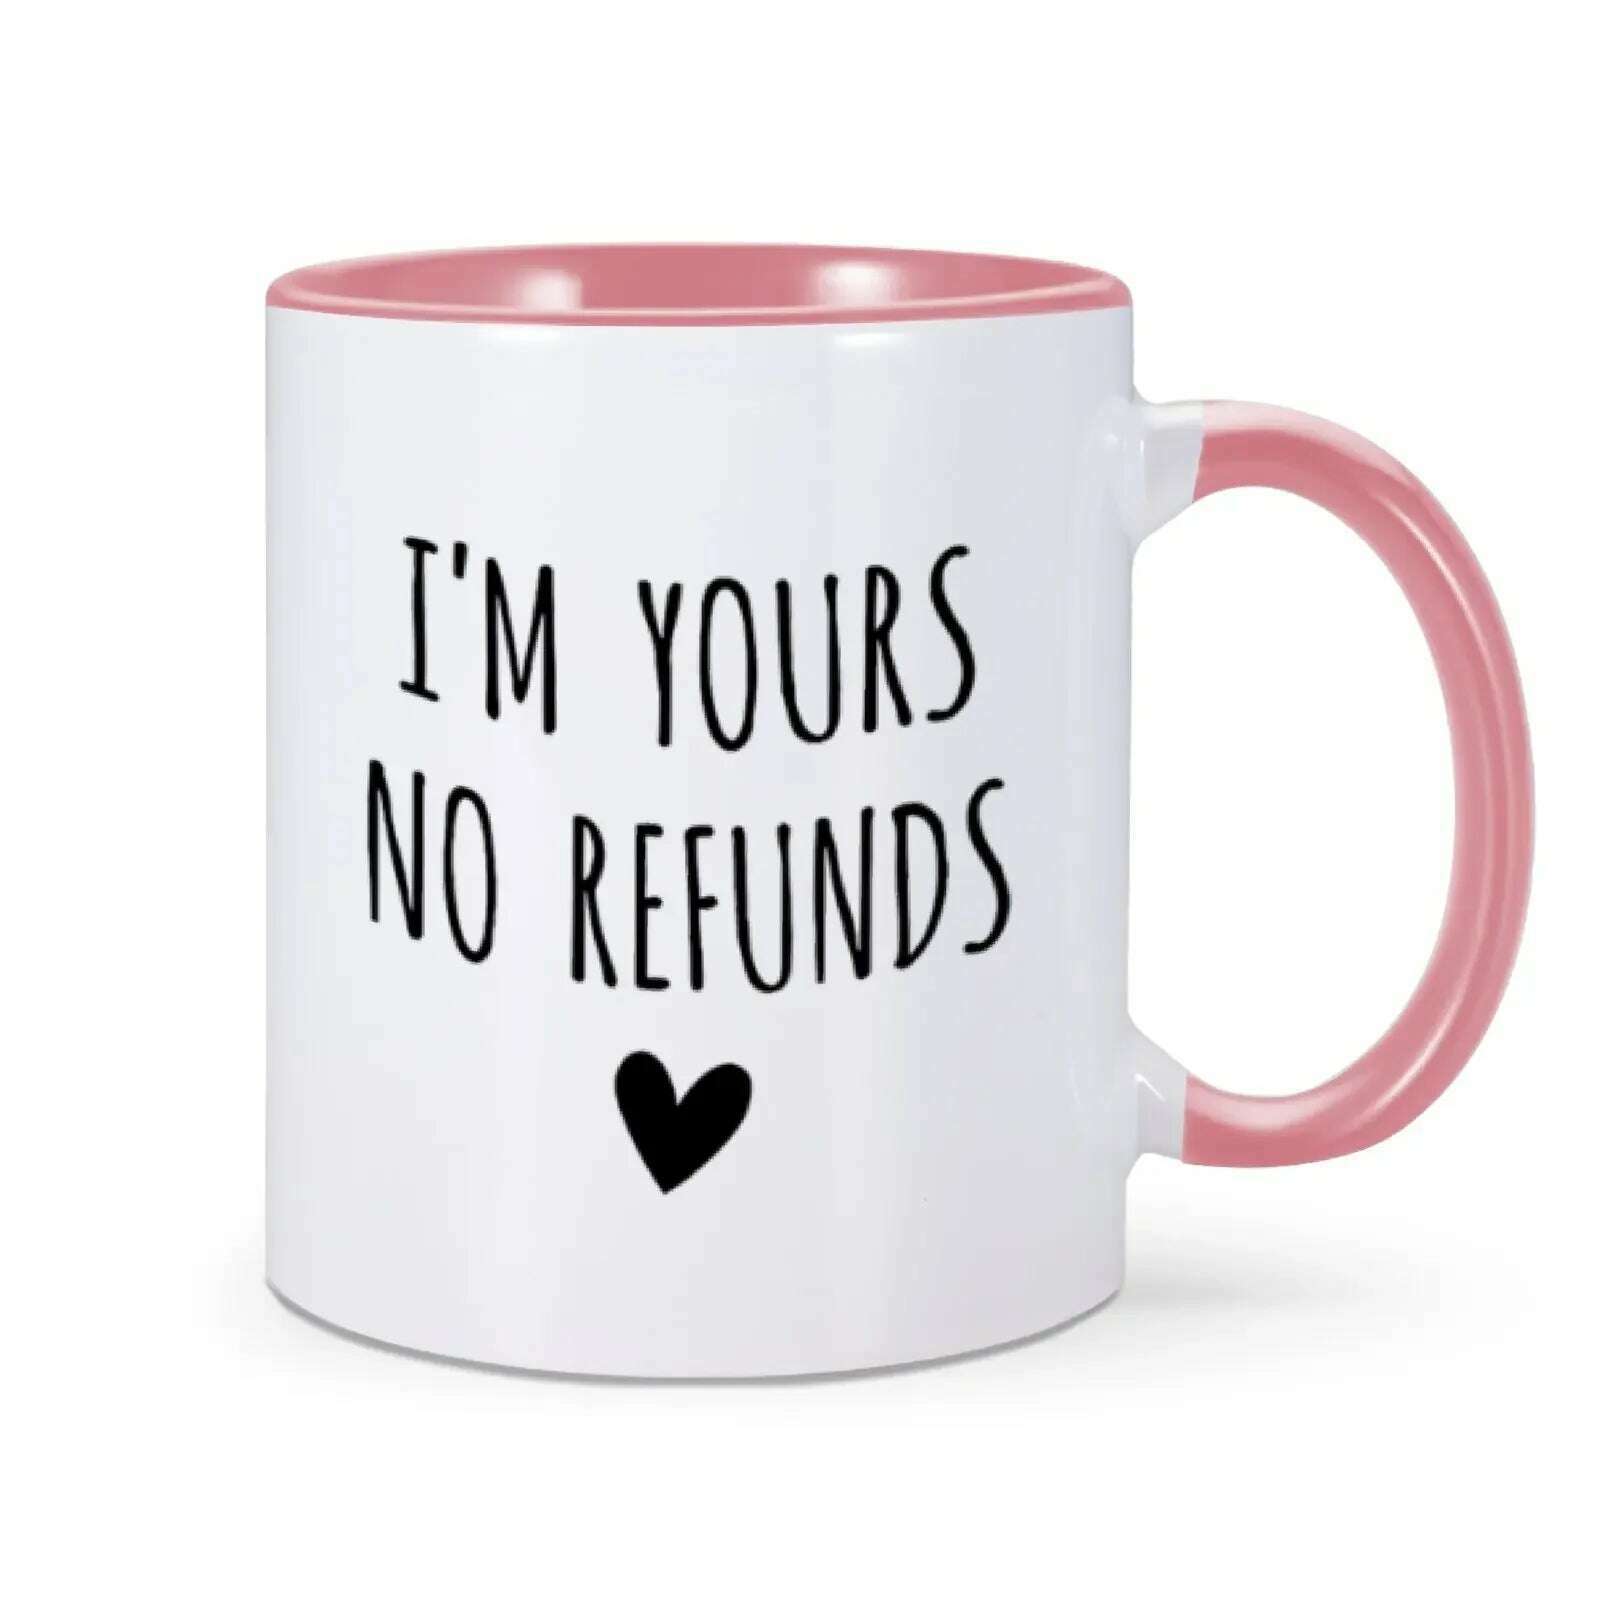 KIMLUD, I'm Yours No Refunds Mug Valentine's Day Mug Valentines Gift for Him Her Husband Wife Funny Coffee Cup for Women Men 11 Oz Mug, Pink / 11oz, KIMLUD Womens Clothes